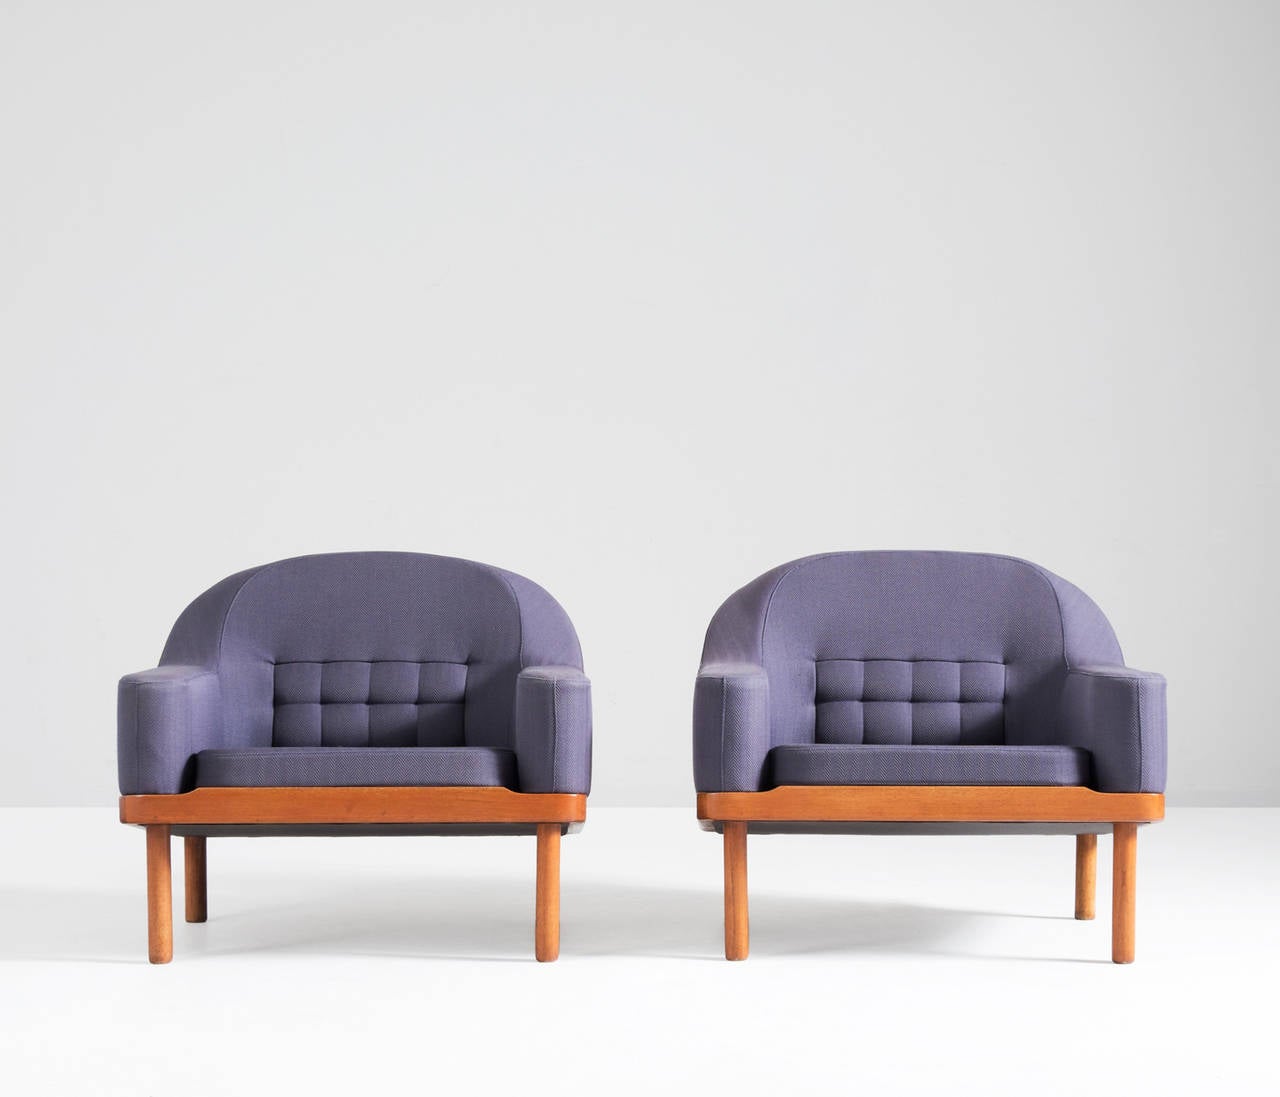 Beautifully designed Scandinavian lounge chairs. The chairs are covered in a very special way with a nice dark purple fabric. This gives a nice contrast with the well-formed, minimalistic teak frame. 

Free shipping for all European destinations